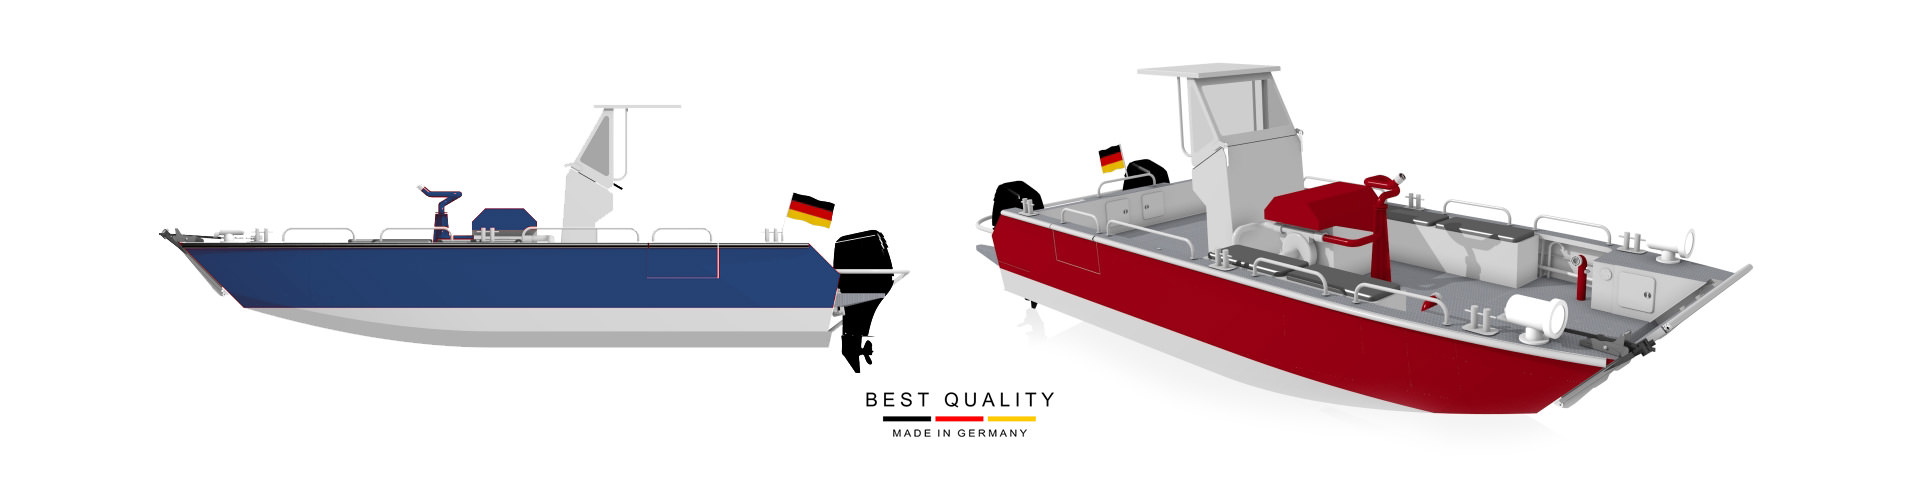 Boats made in Germany